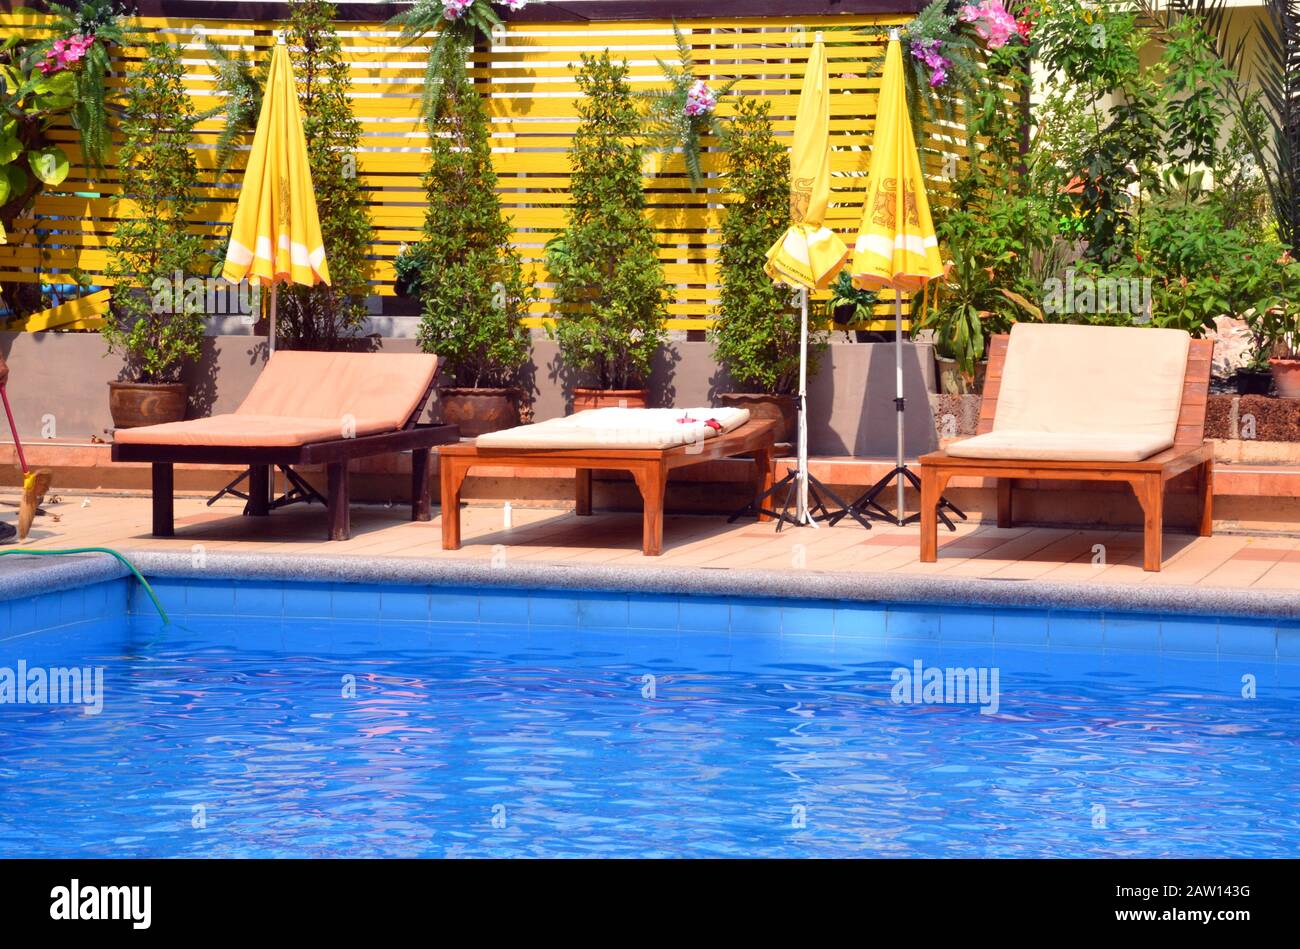 Empty sunloungers beside a swimming pool Stock Photo